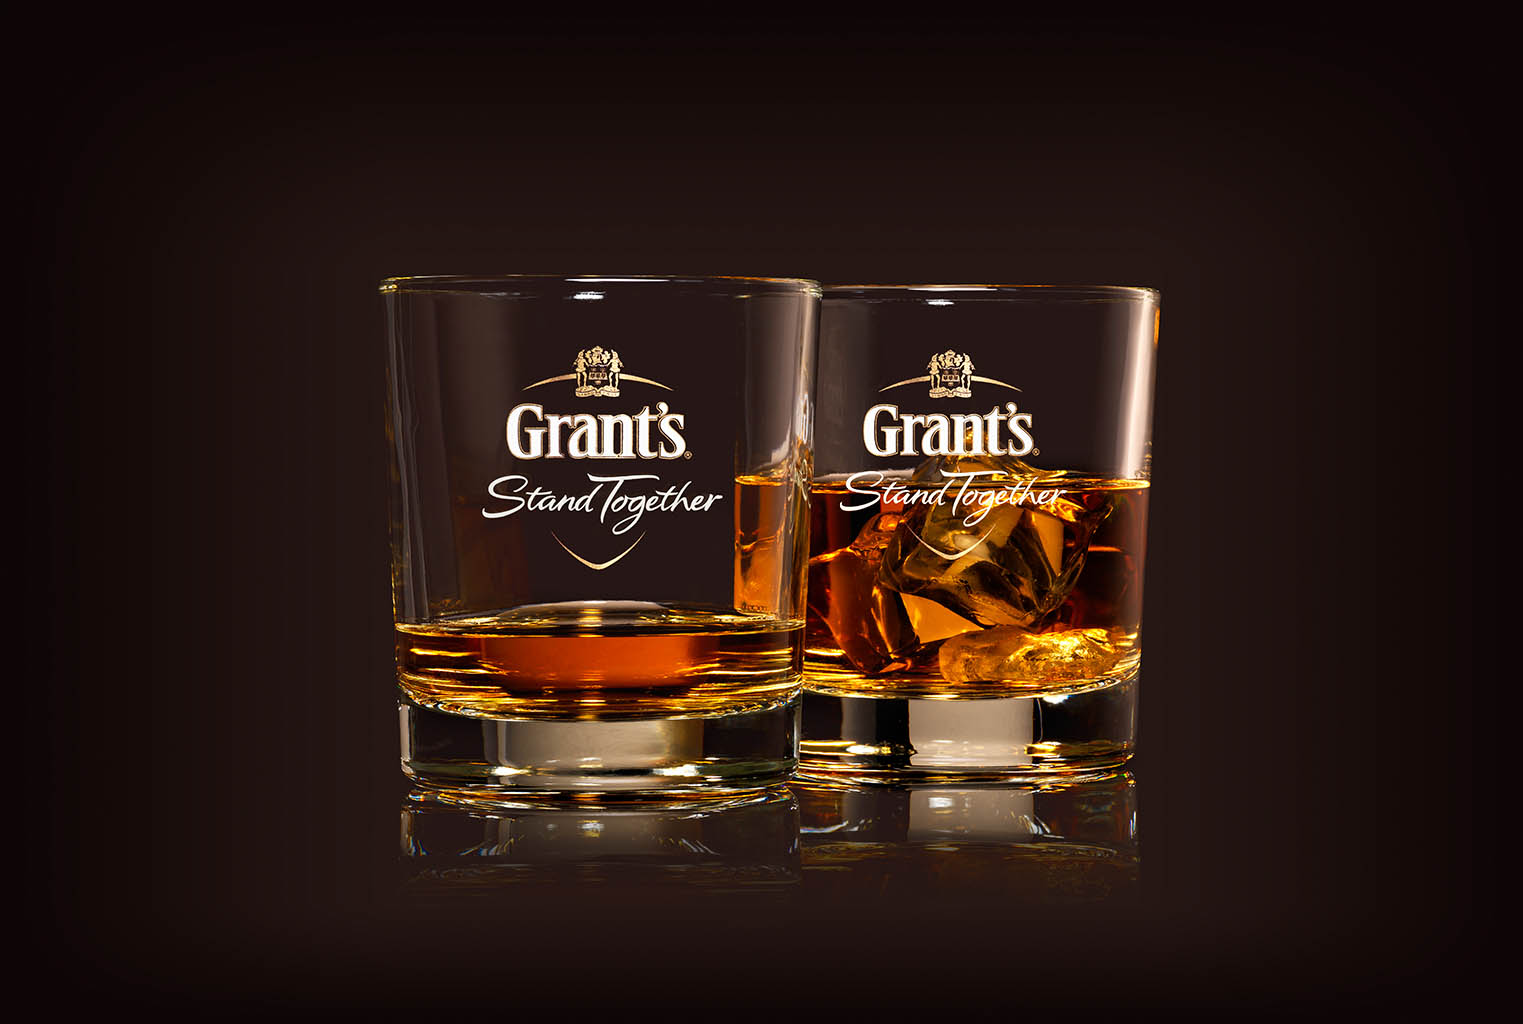 Drinks Photography of Grant's whisky server by Packshot Factory